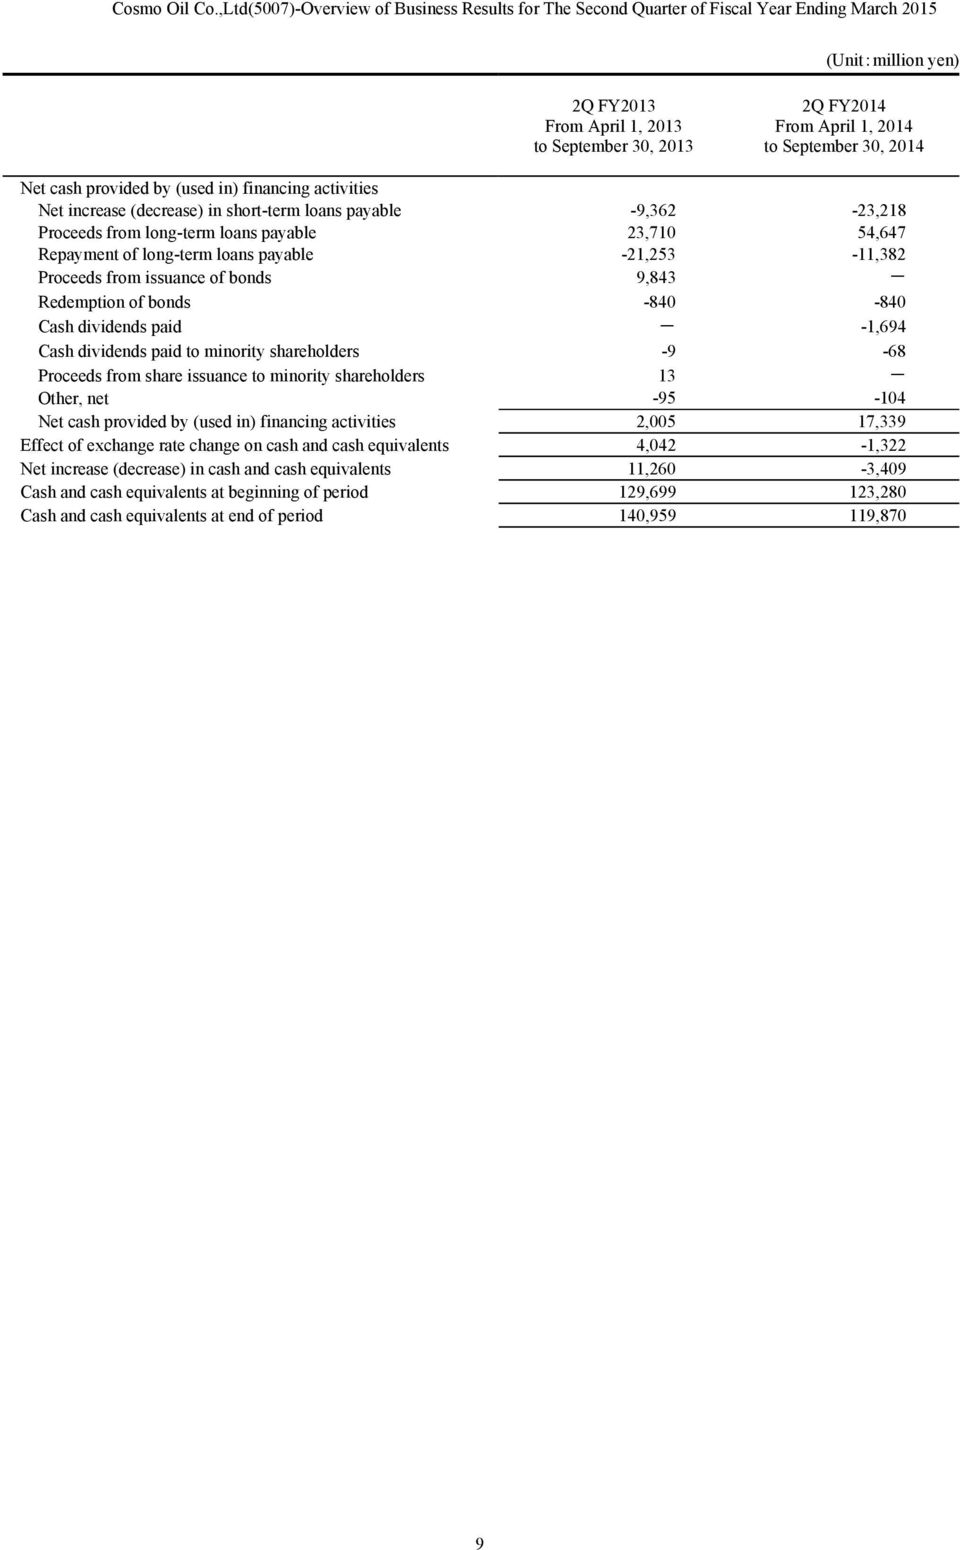 dividends paid - -1,694 Cash dividends paid to minority shareholders -9-68 Proceeds from share issuance to minority shareholders 13 - Other, net -95-104 Net cash provided by (used in) financing